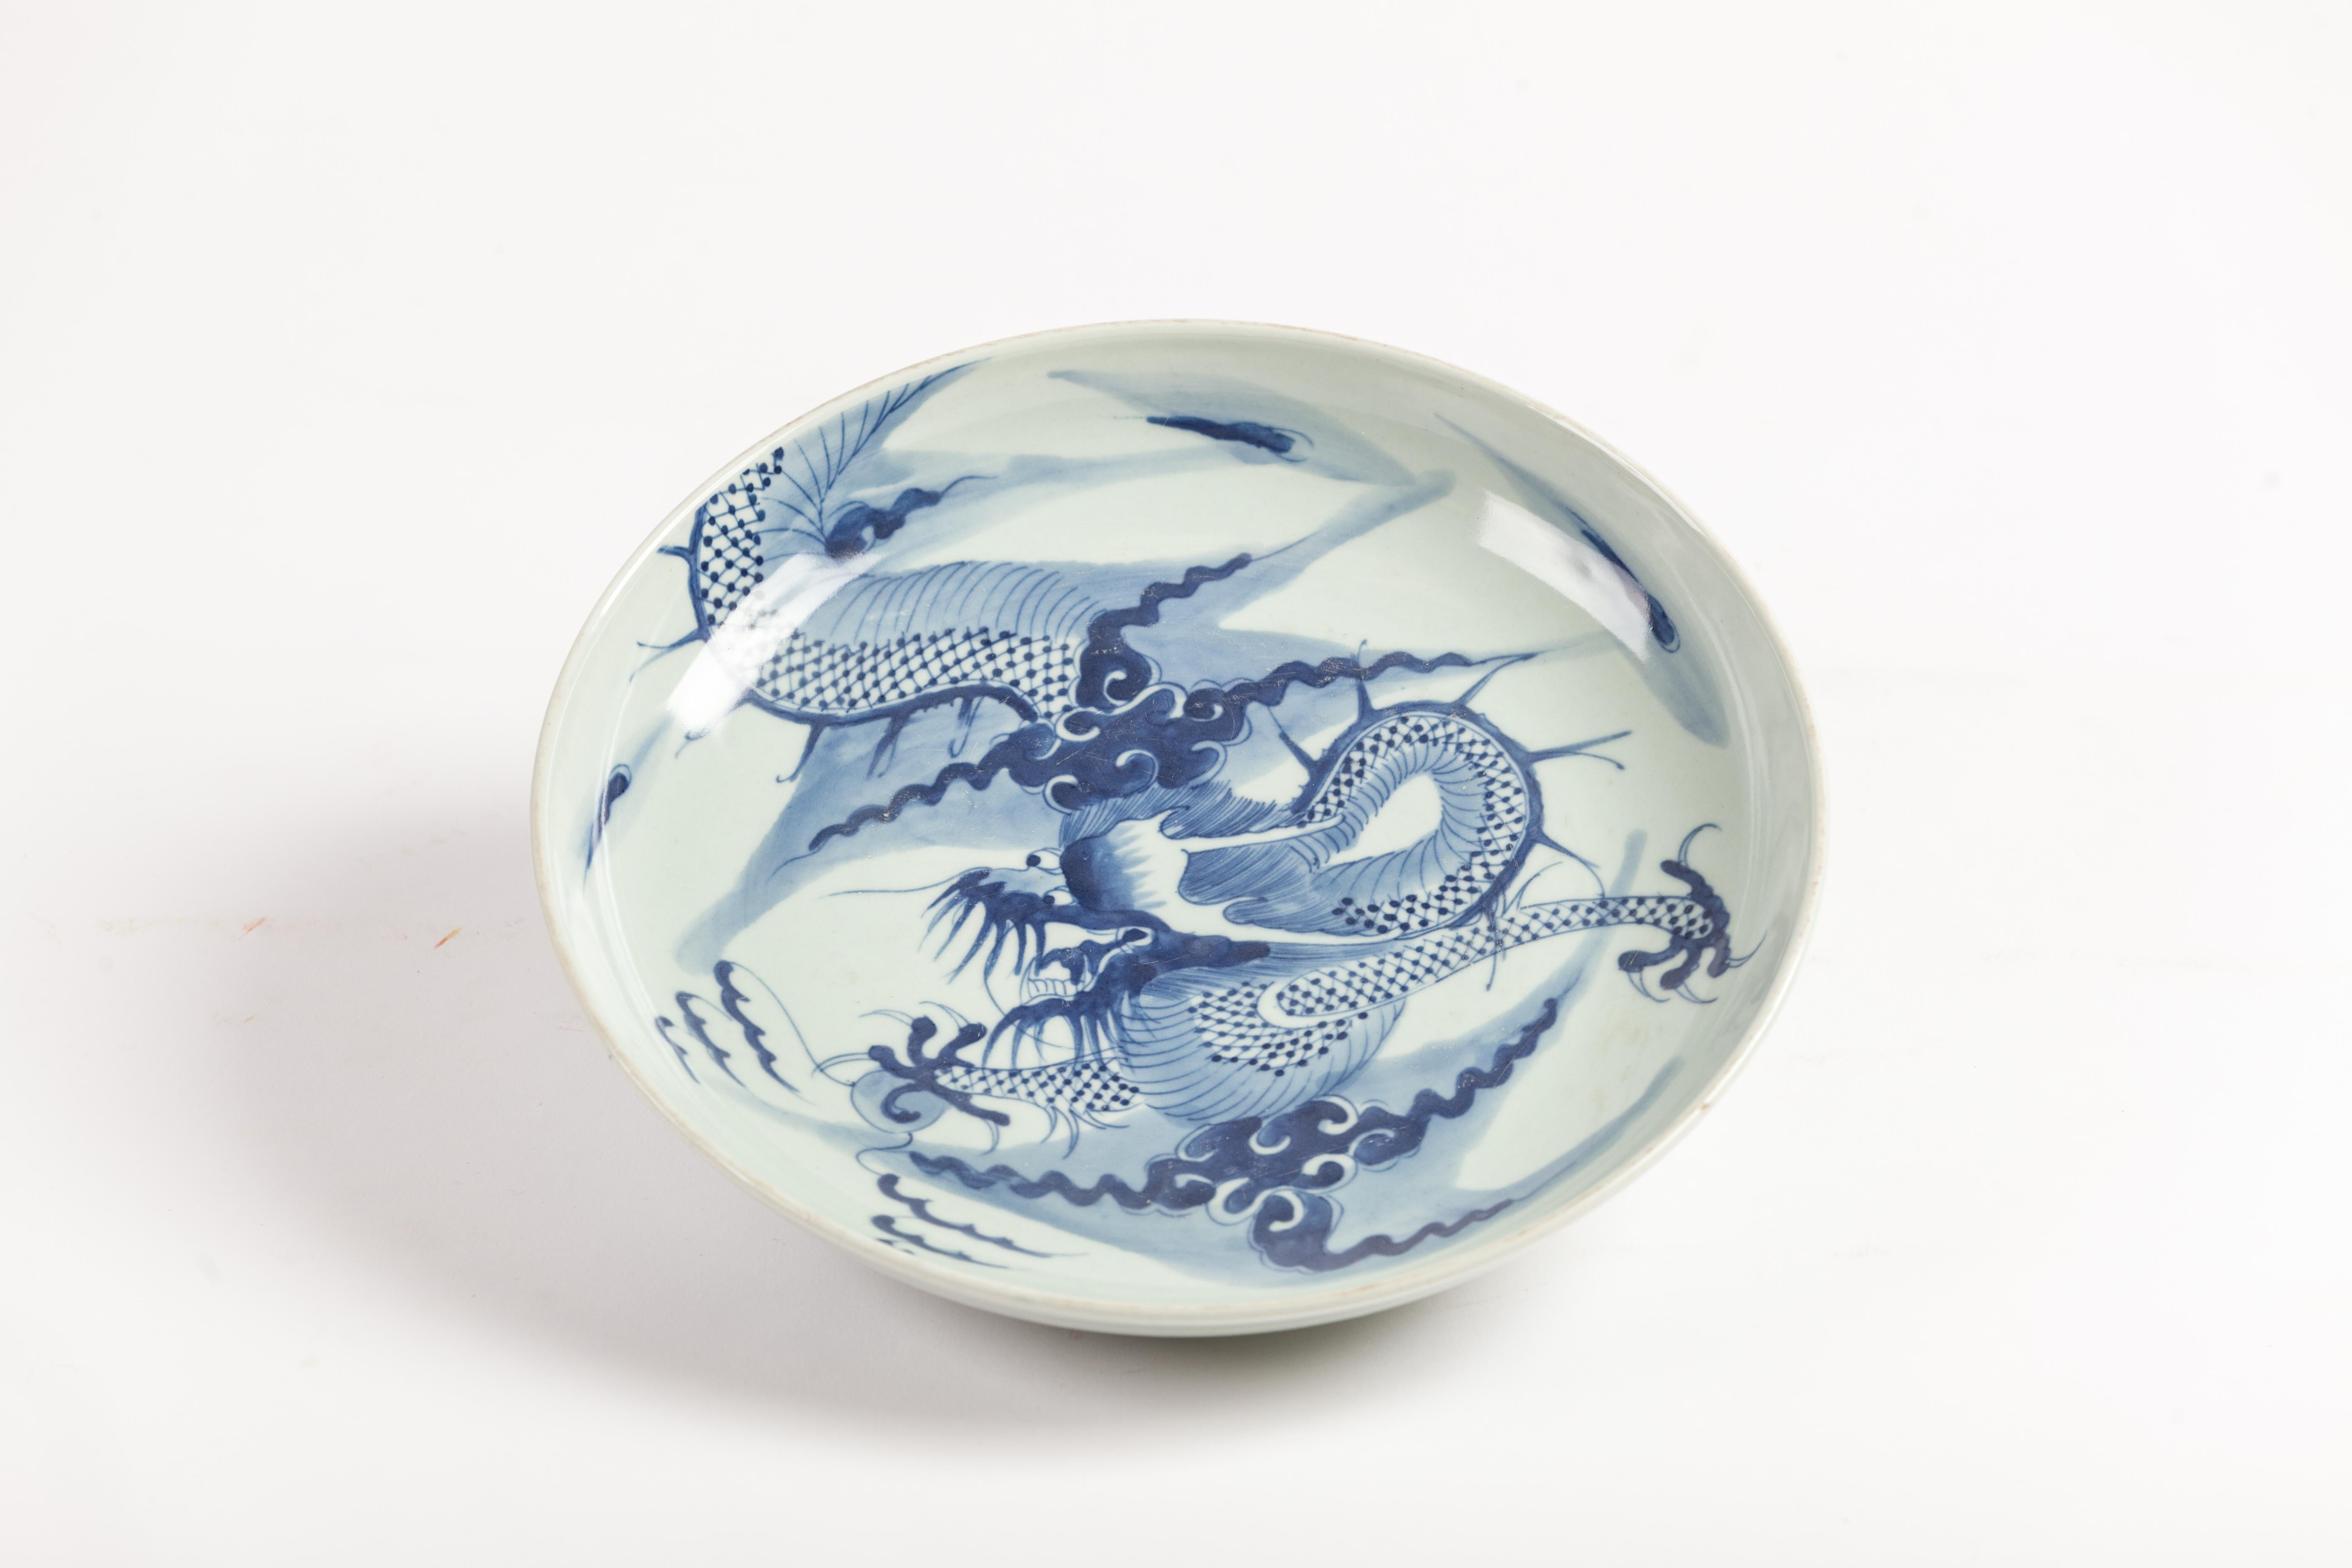 Pair of blue and white chargers with dragon art.